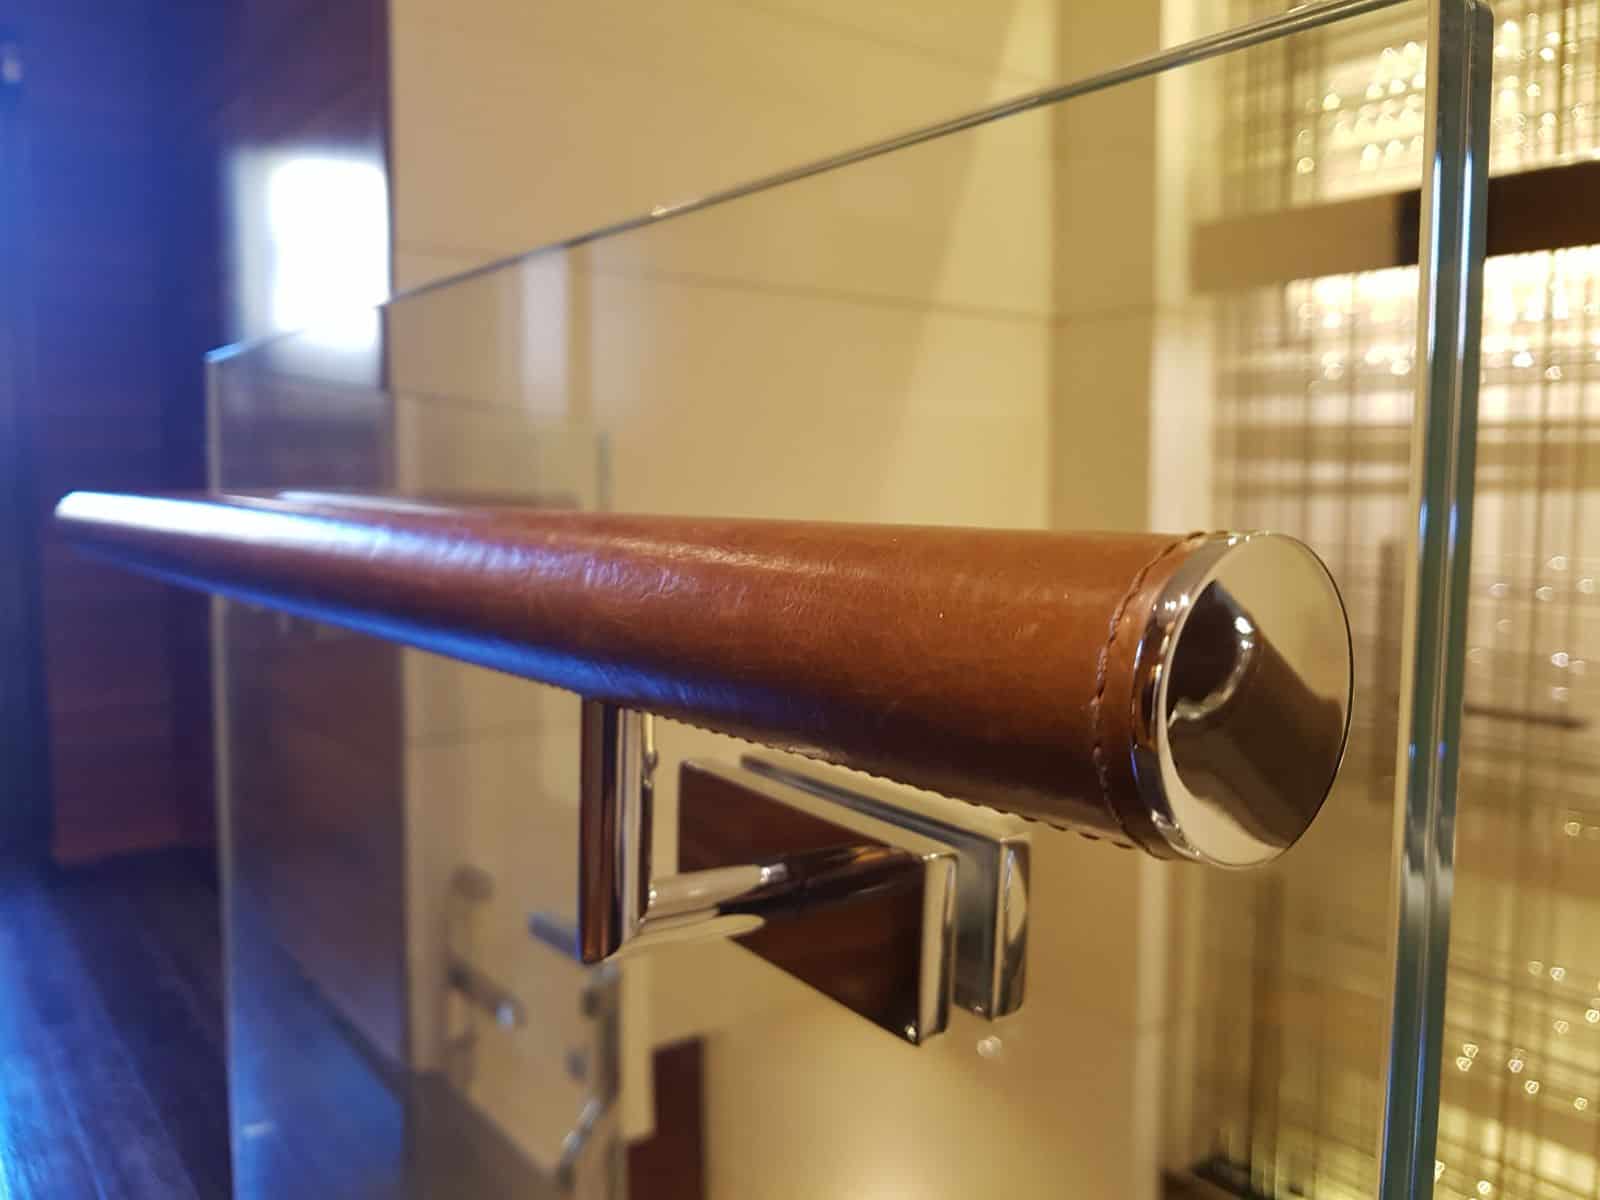 handrails wrapped in brown leather